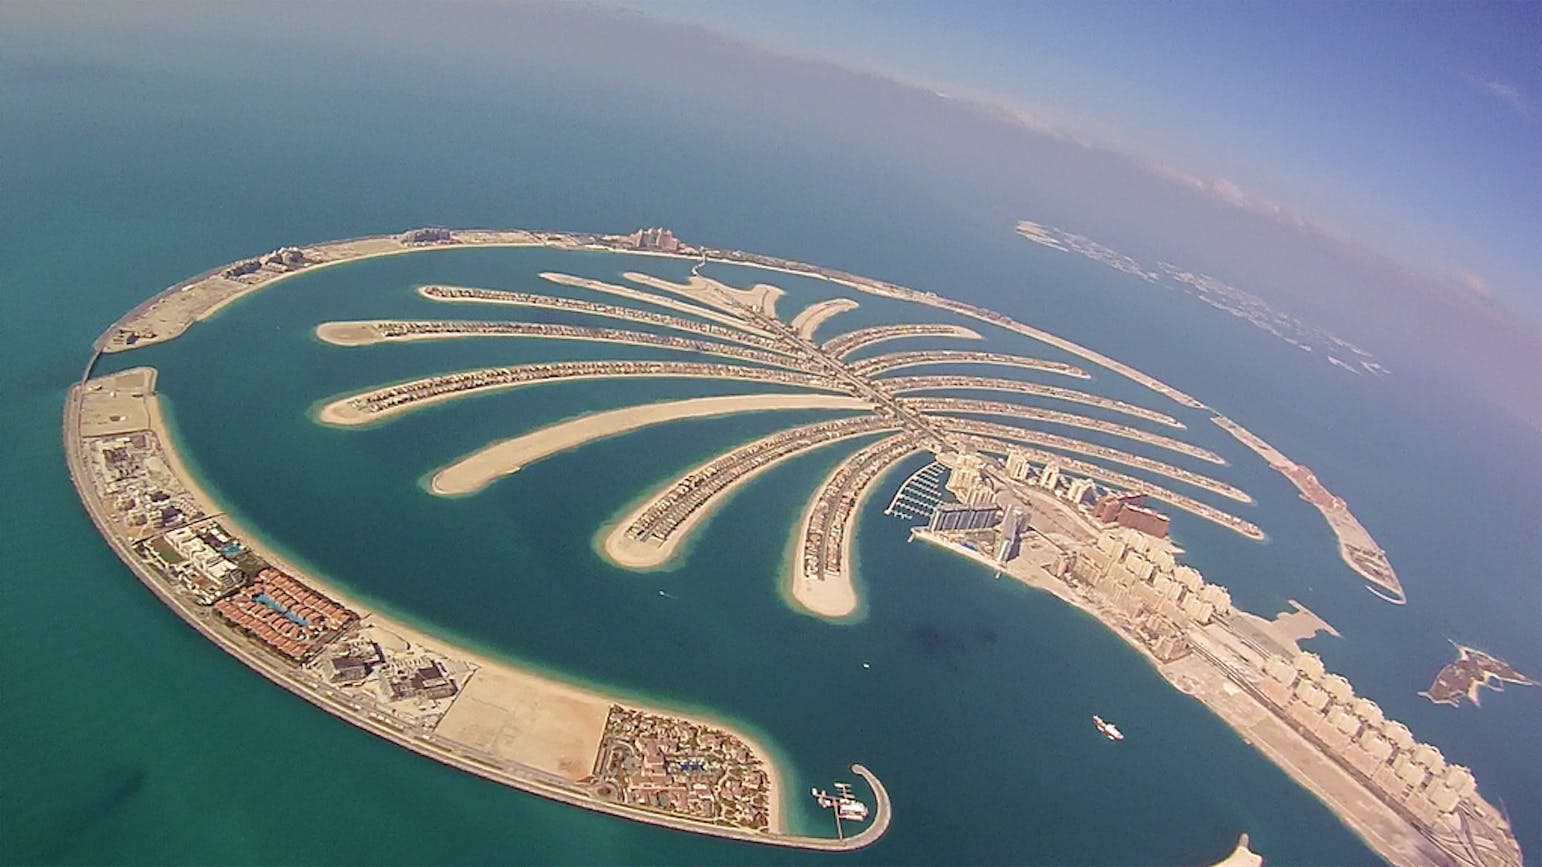 Nearly two decades in the making, Dubai's Palm Jumeirah nears completionBlock this user